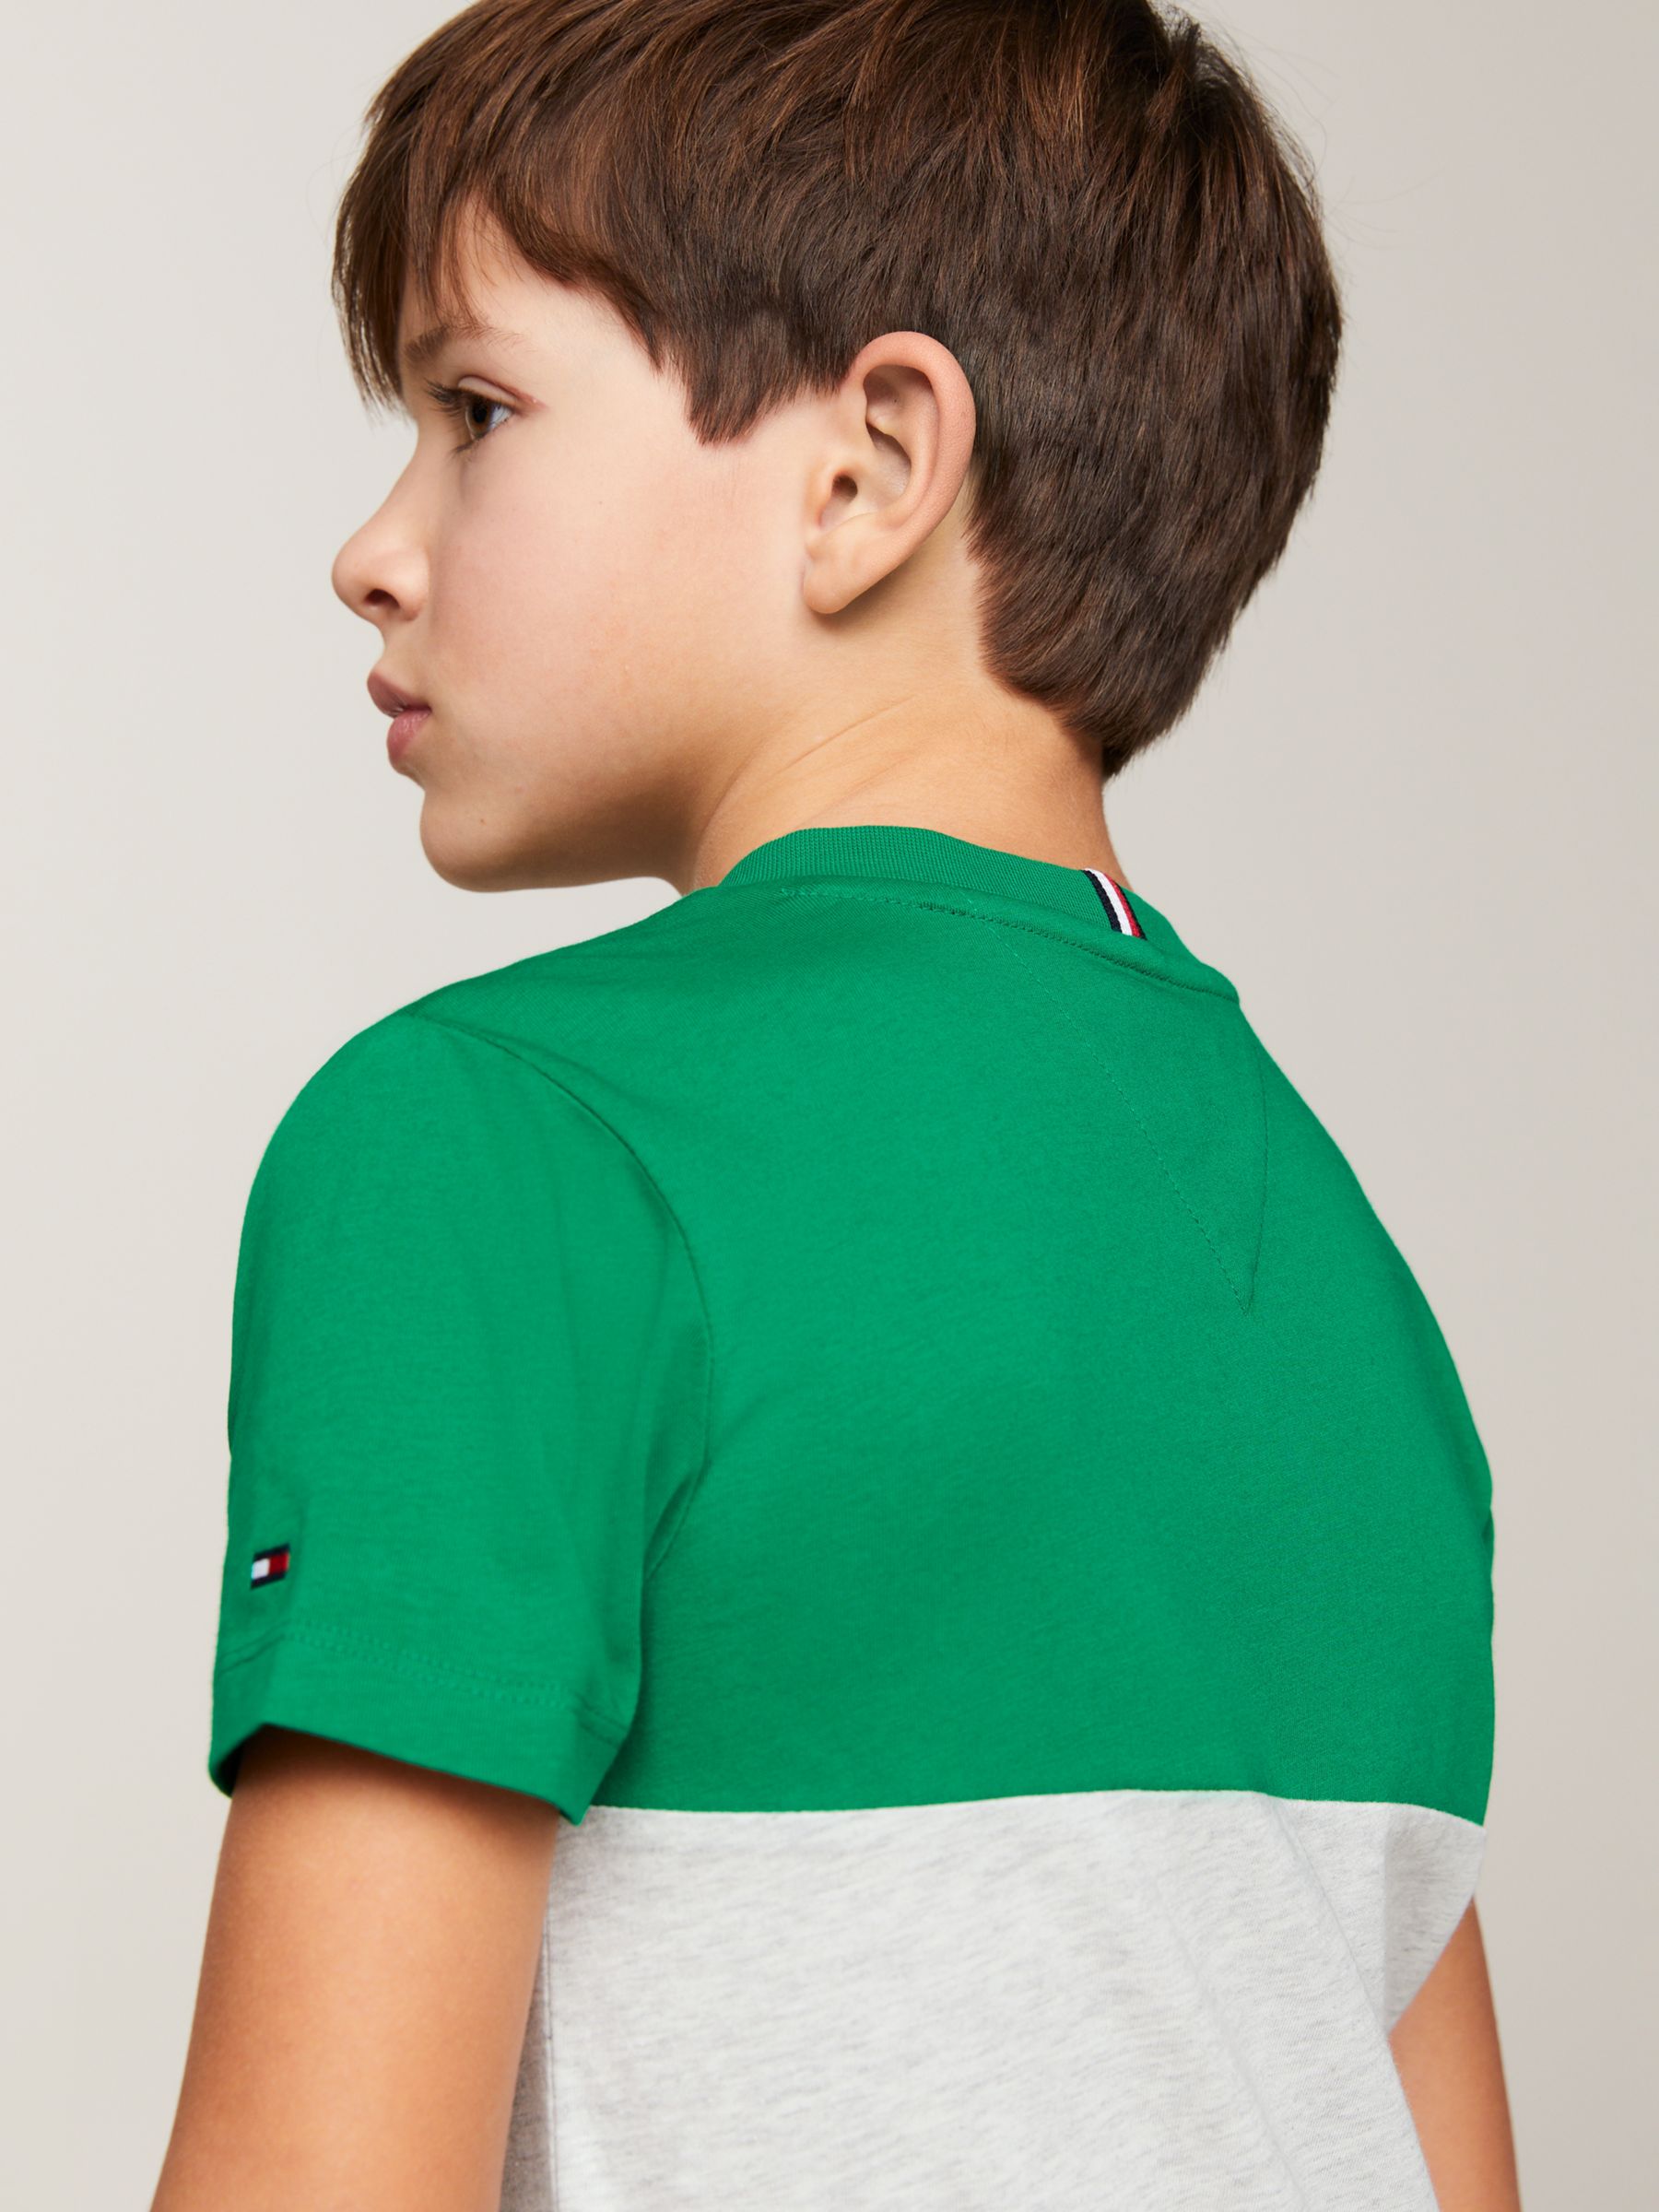 Tommy Hilfiger Kids' Logo Colour Block T-Shirt, Olympic Green, 3 years